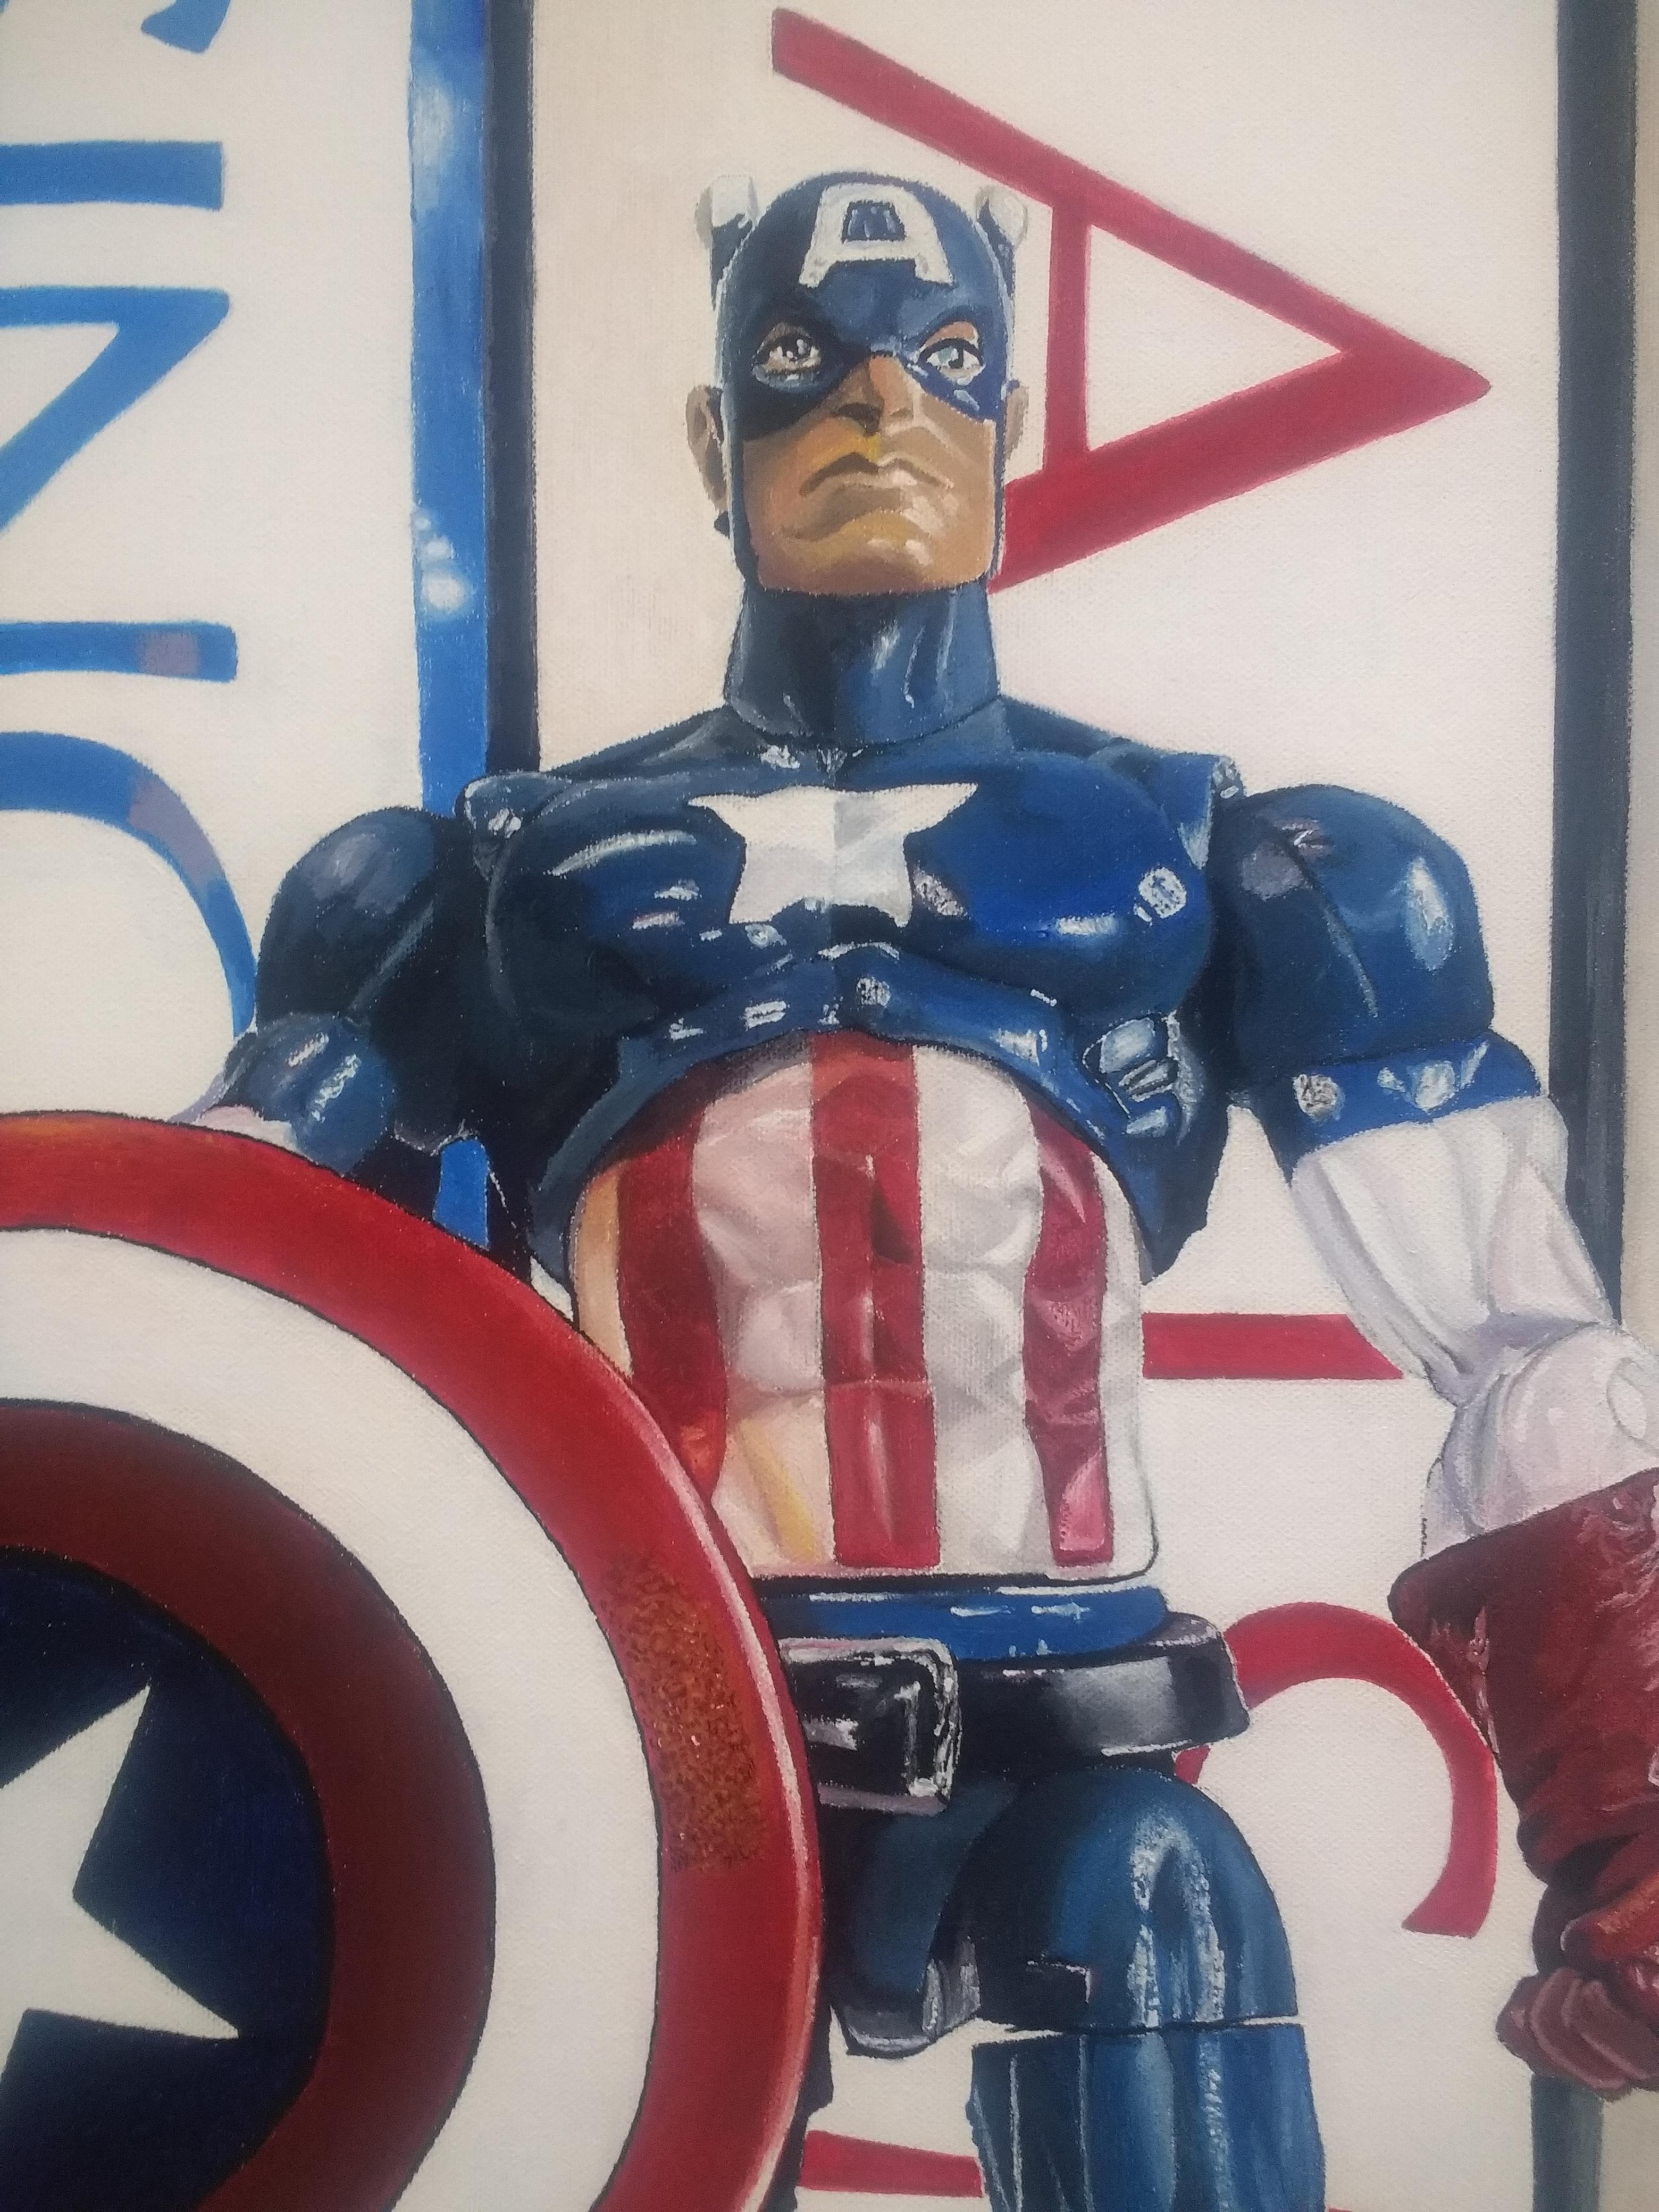 Hope 2 (A New Hope) - Captain America, Marvel Comic Book Hero: Acrylic on Canvas - Painting by Matthew Shutt